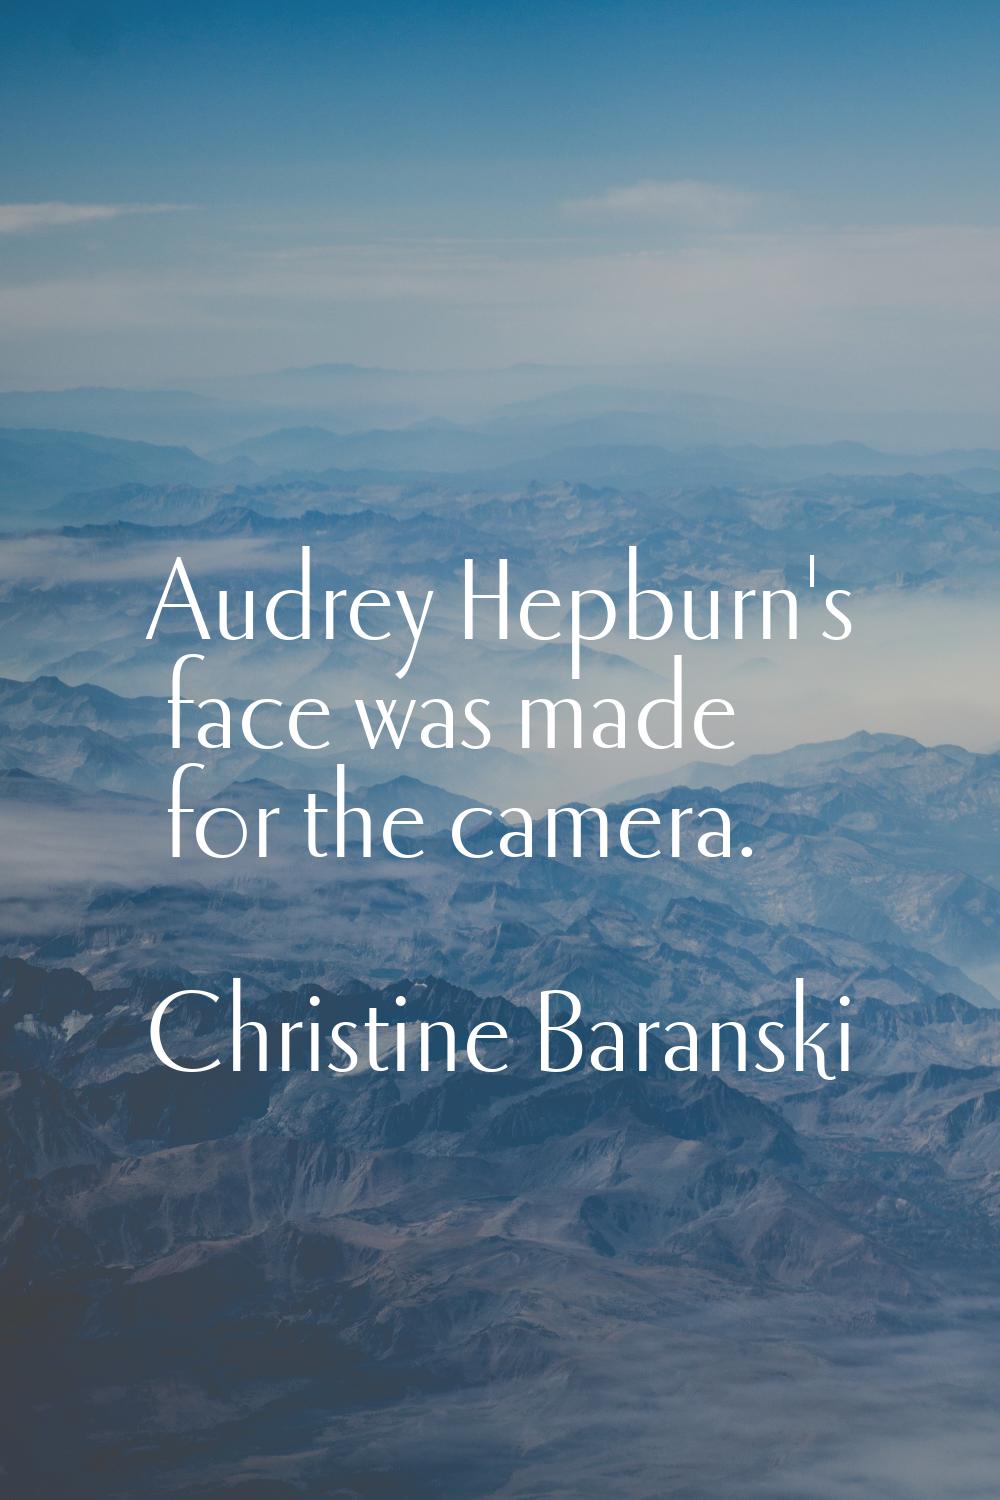 Audrey Hepburn's face was made for the camera.